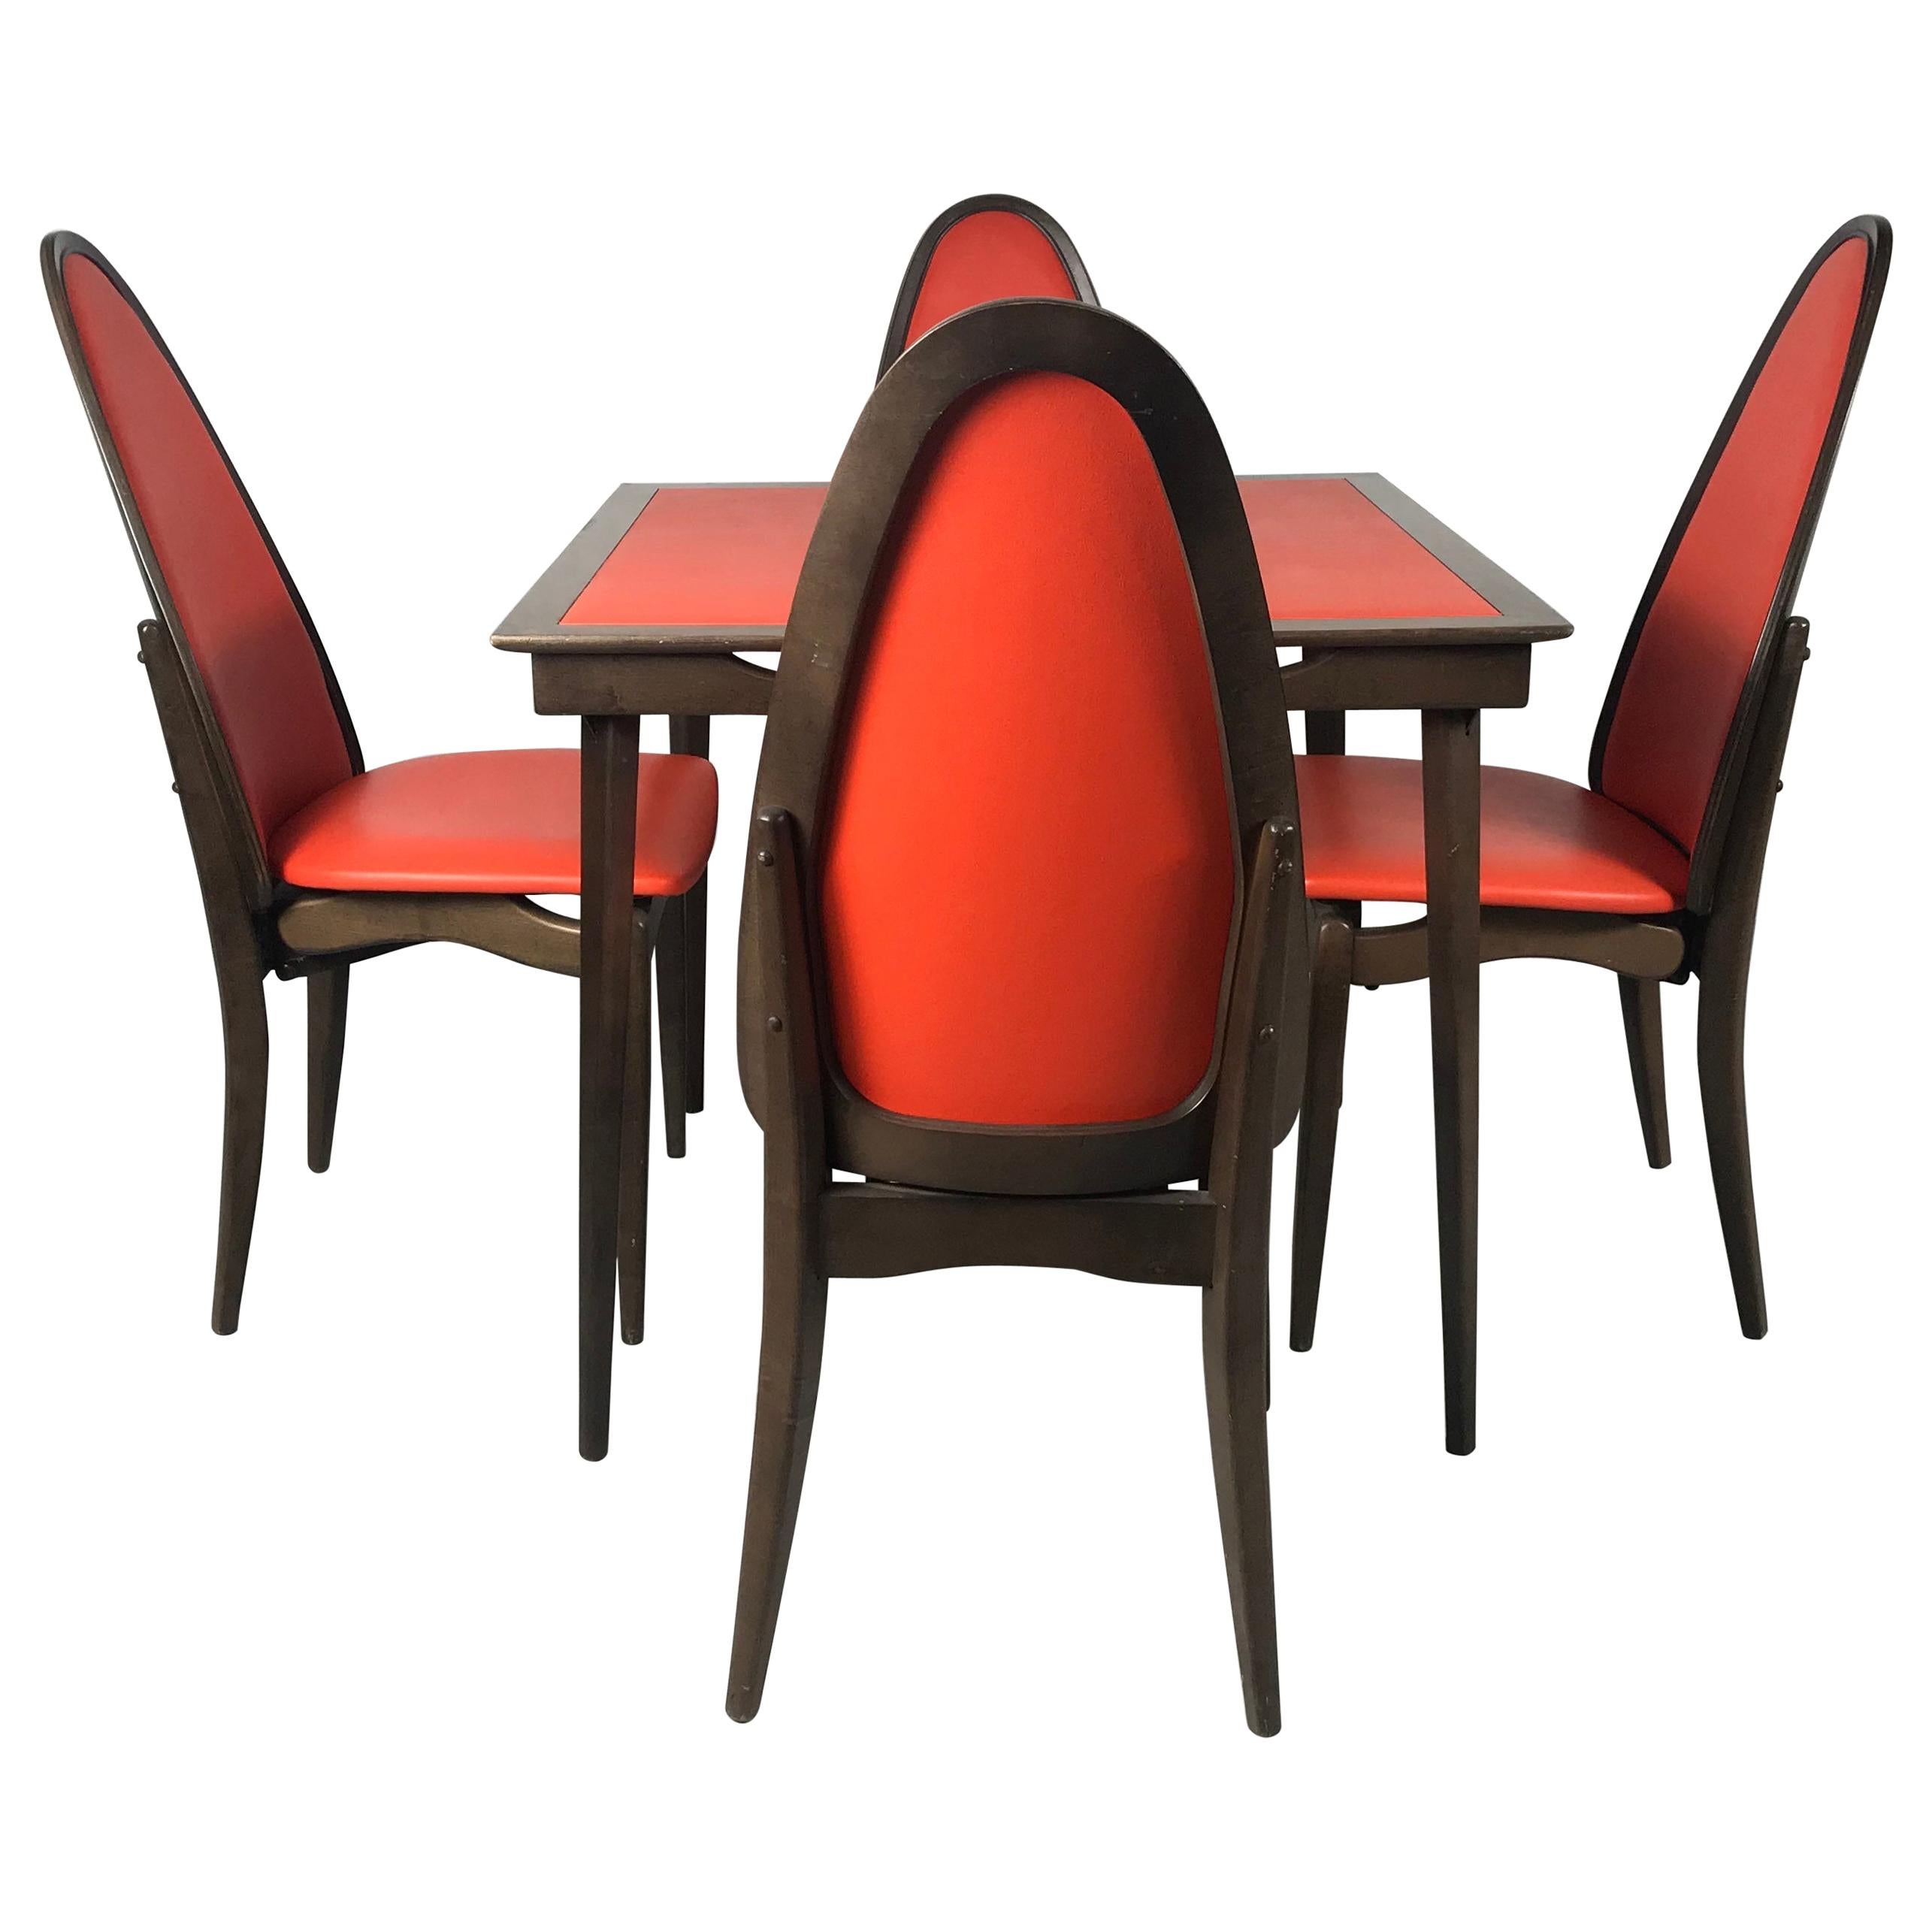 Elegant Stylized Folding Table and Chairs Mfg. by Stakmore Furniture Co.